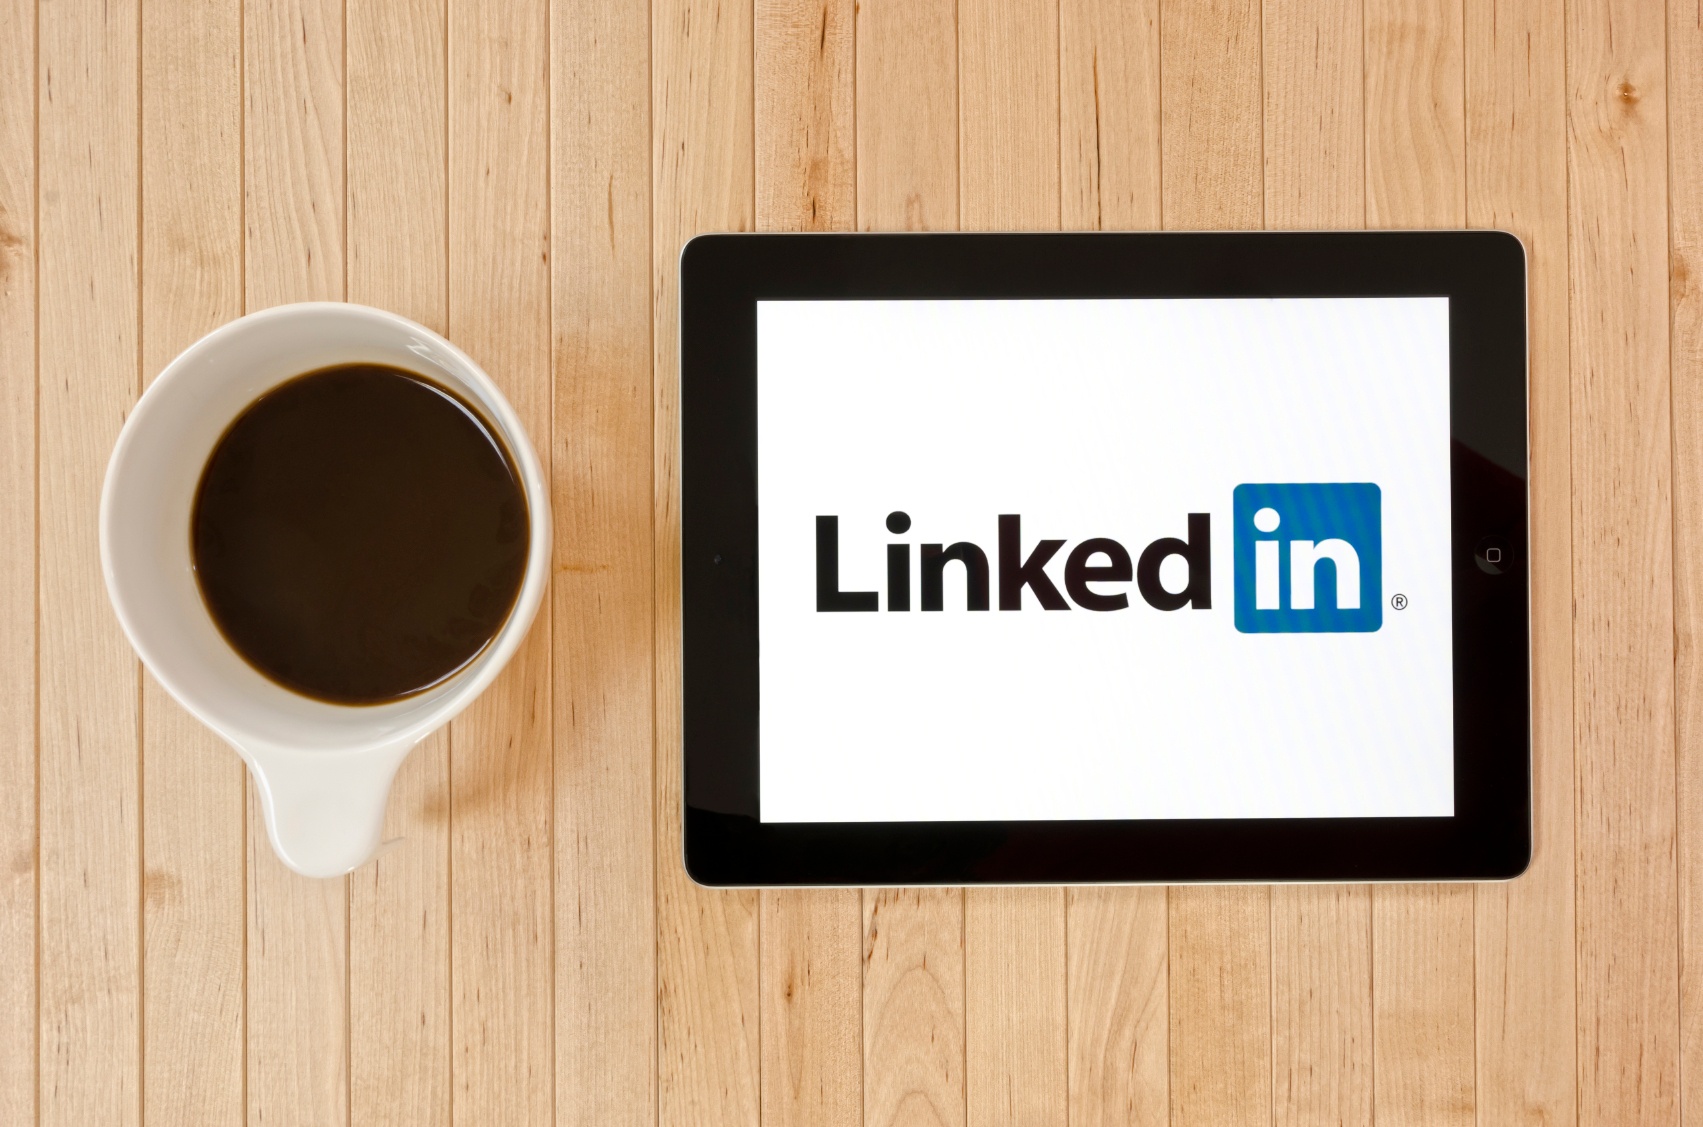 Matching your LinkedIn profile to your resume